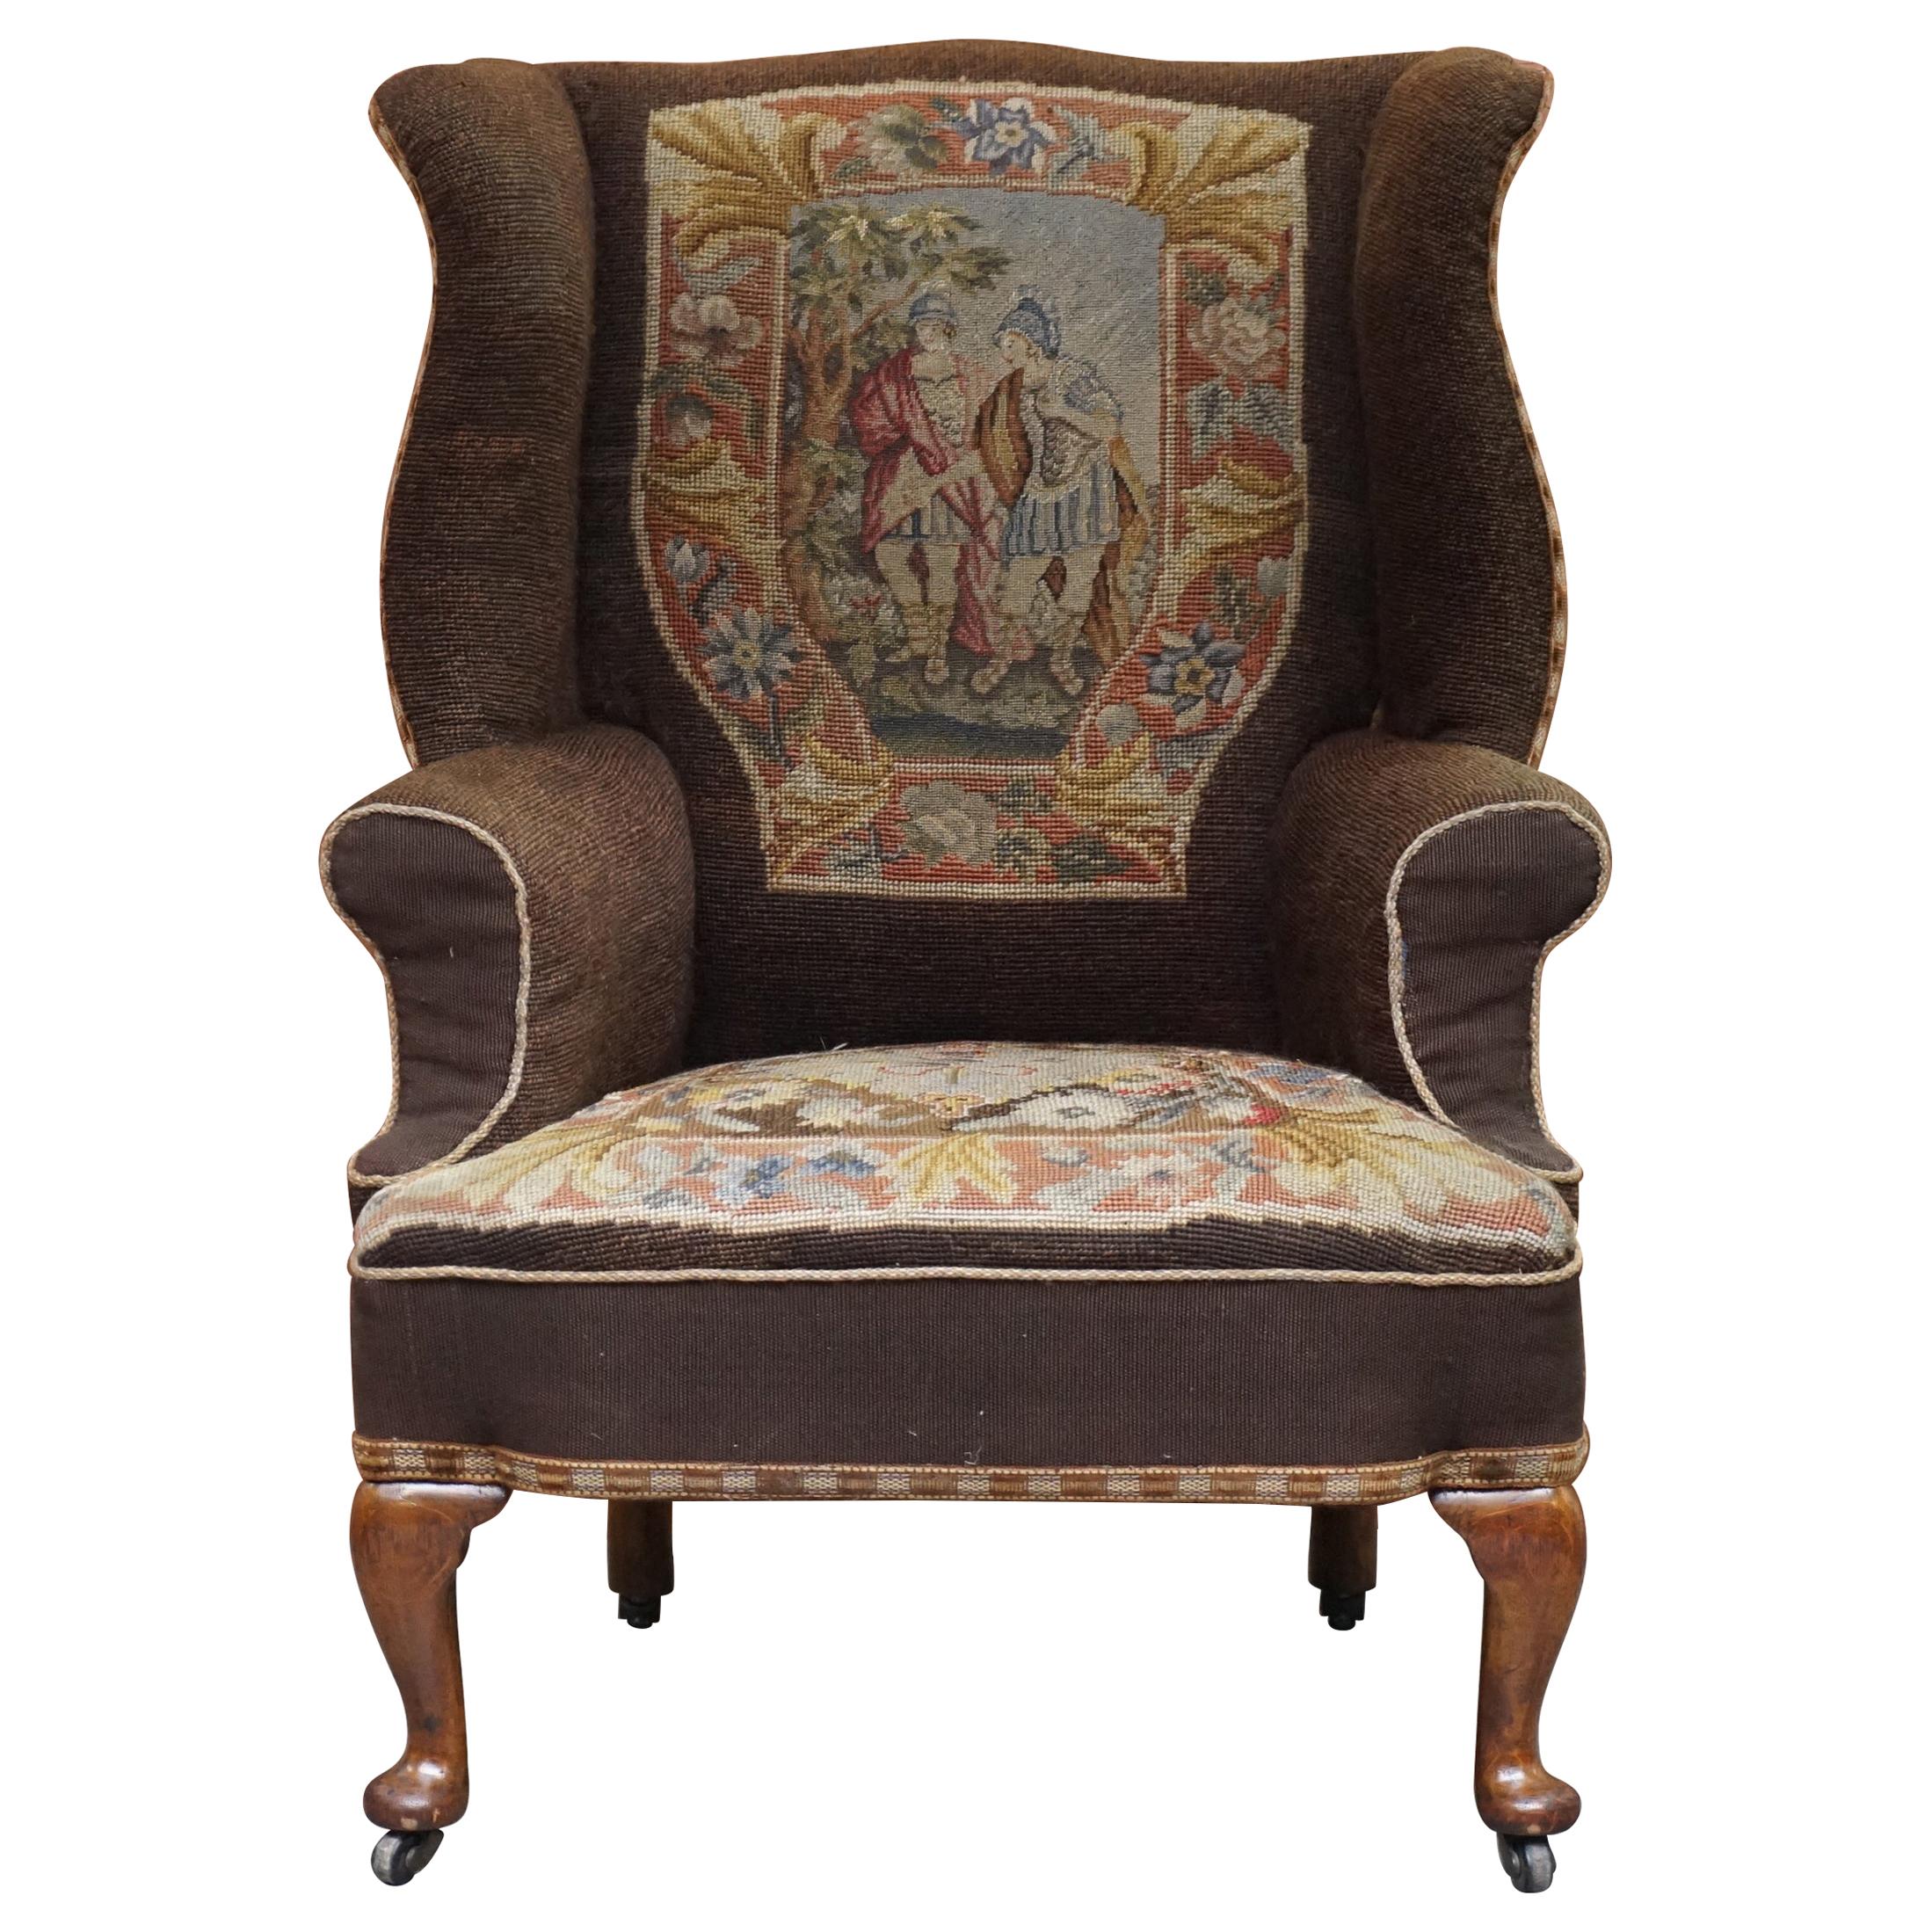 Original circa 1840 Antique Victorian Wingback Armchair Embroidered Upholstery